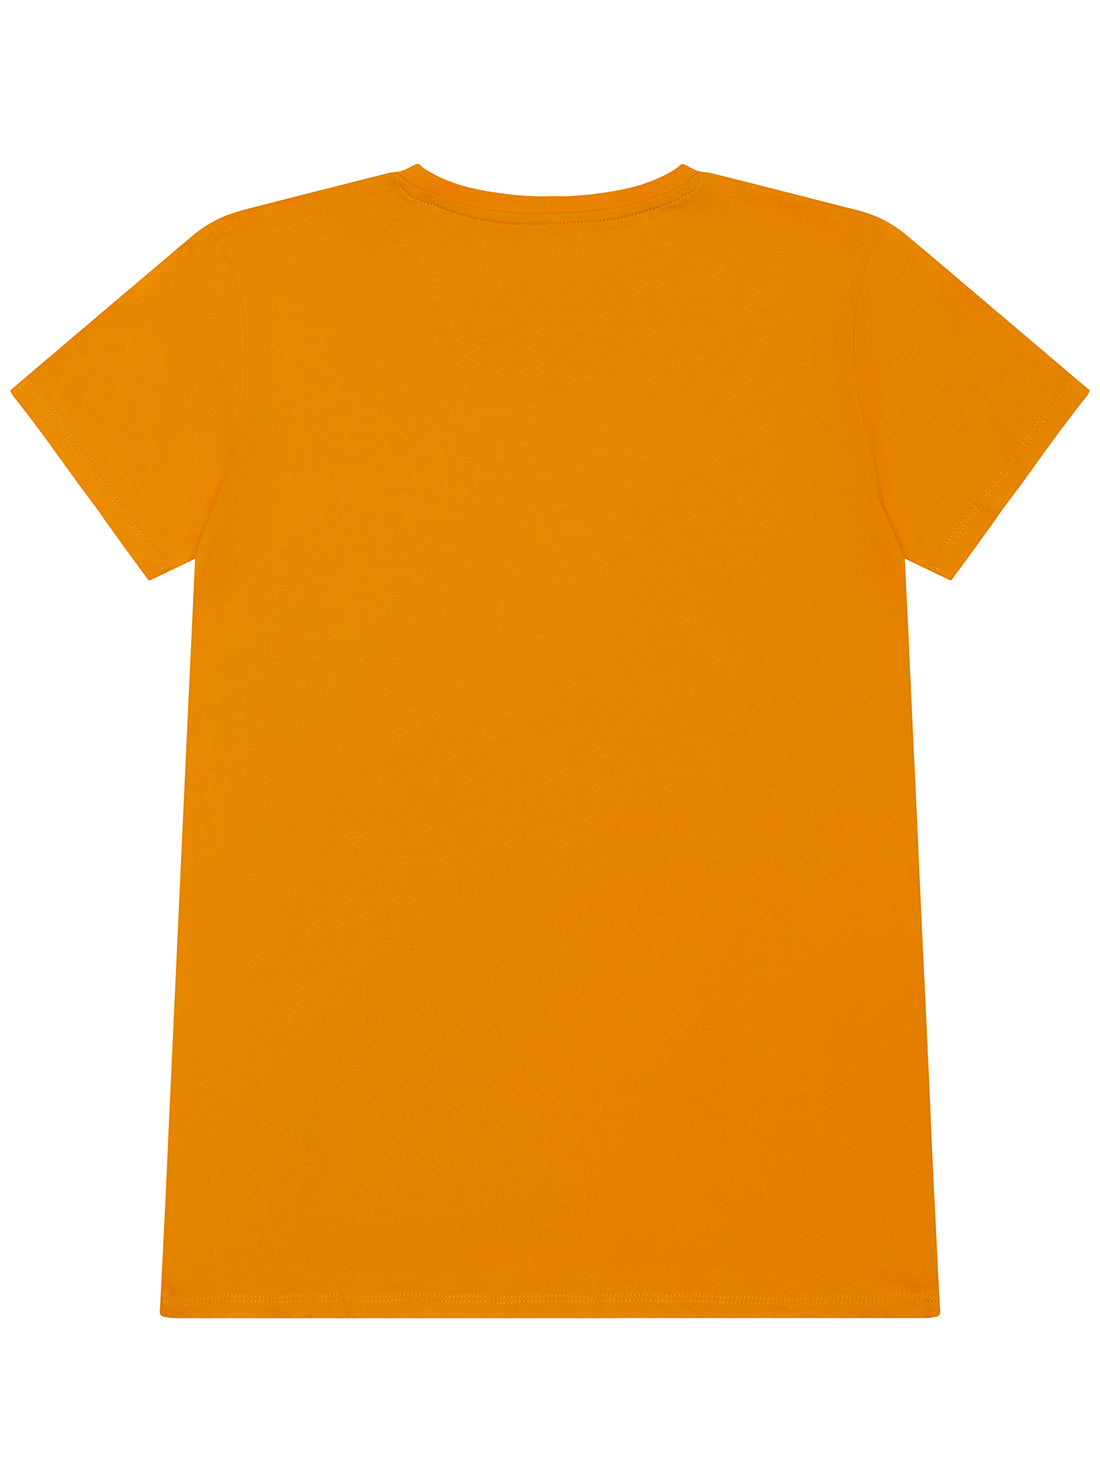 Orange Be the Best T-Shirt (7-16) | GUESS Kids | back view